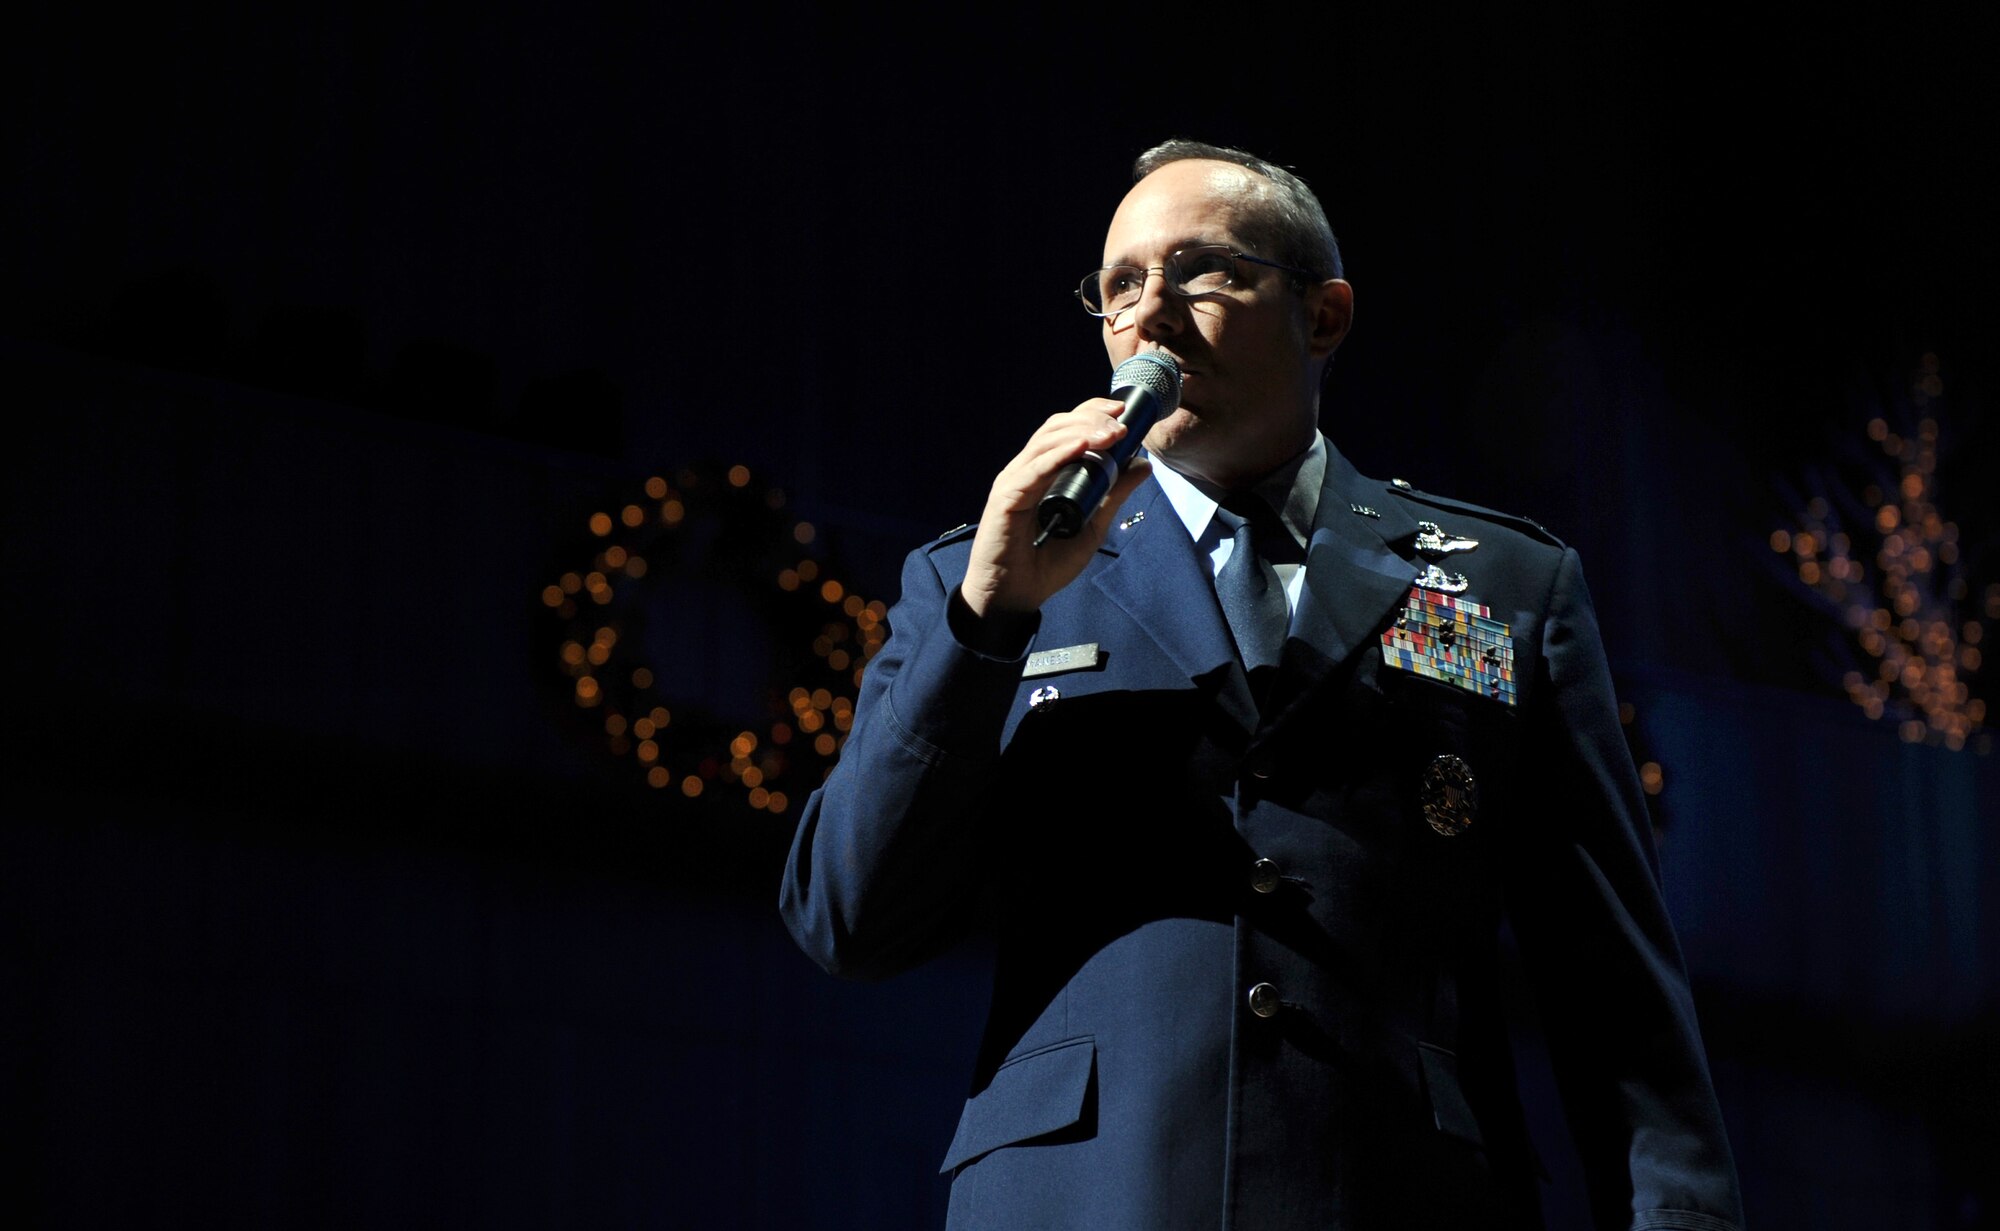 OFFUTT AIR FORCE BASE, Neb. -- Col. Robert L. Maness,  55th Wing vice commander, presents the band to concert goers before the annual Heartland of America Band's holiday concert at the Holland Performing Arts Center, Dec. 12.

U.S. Air Force Photo by Josh Plueger